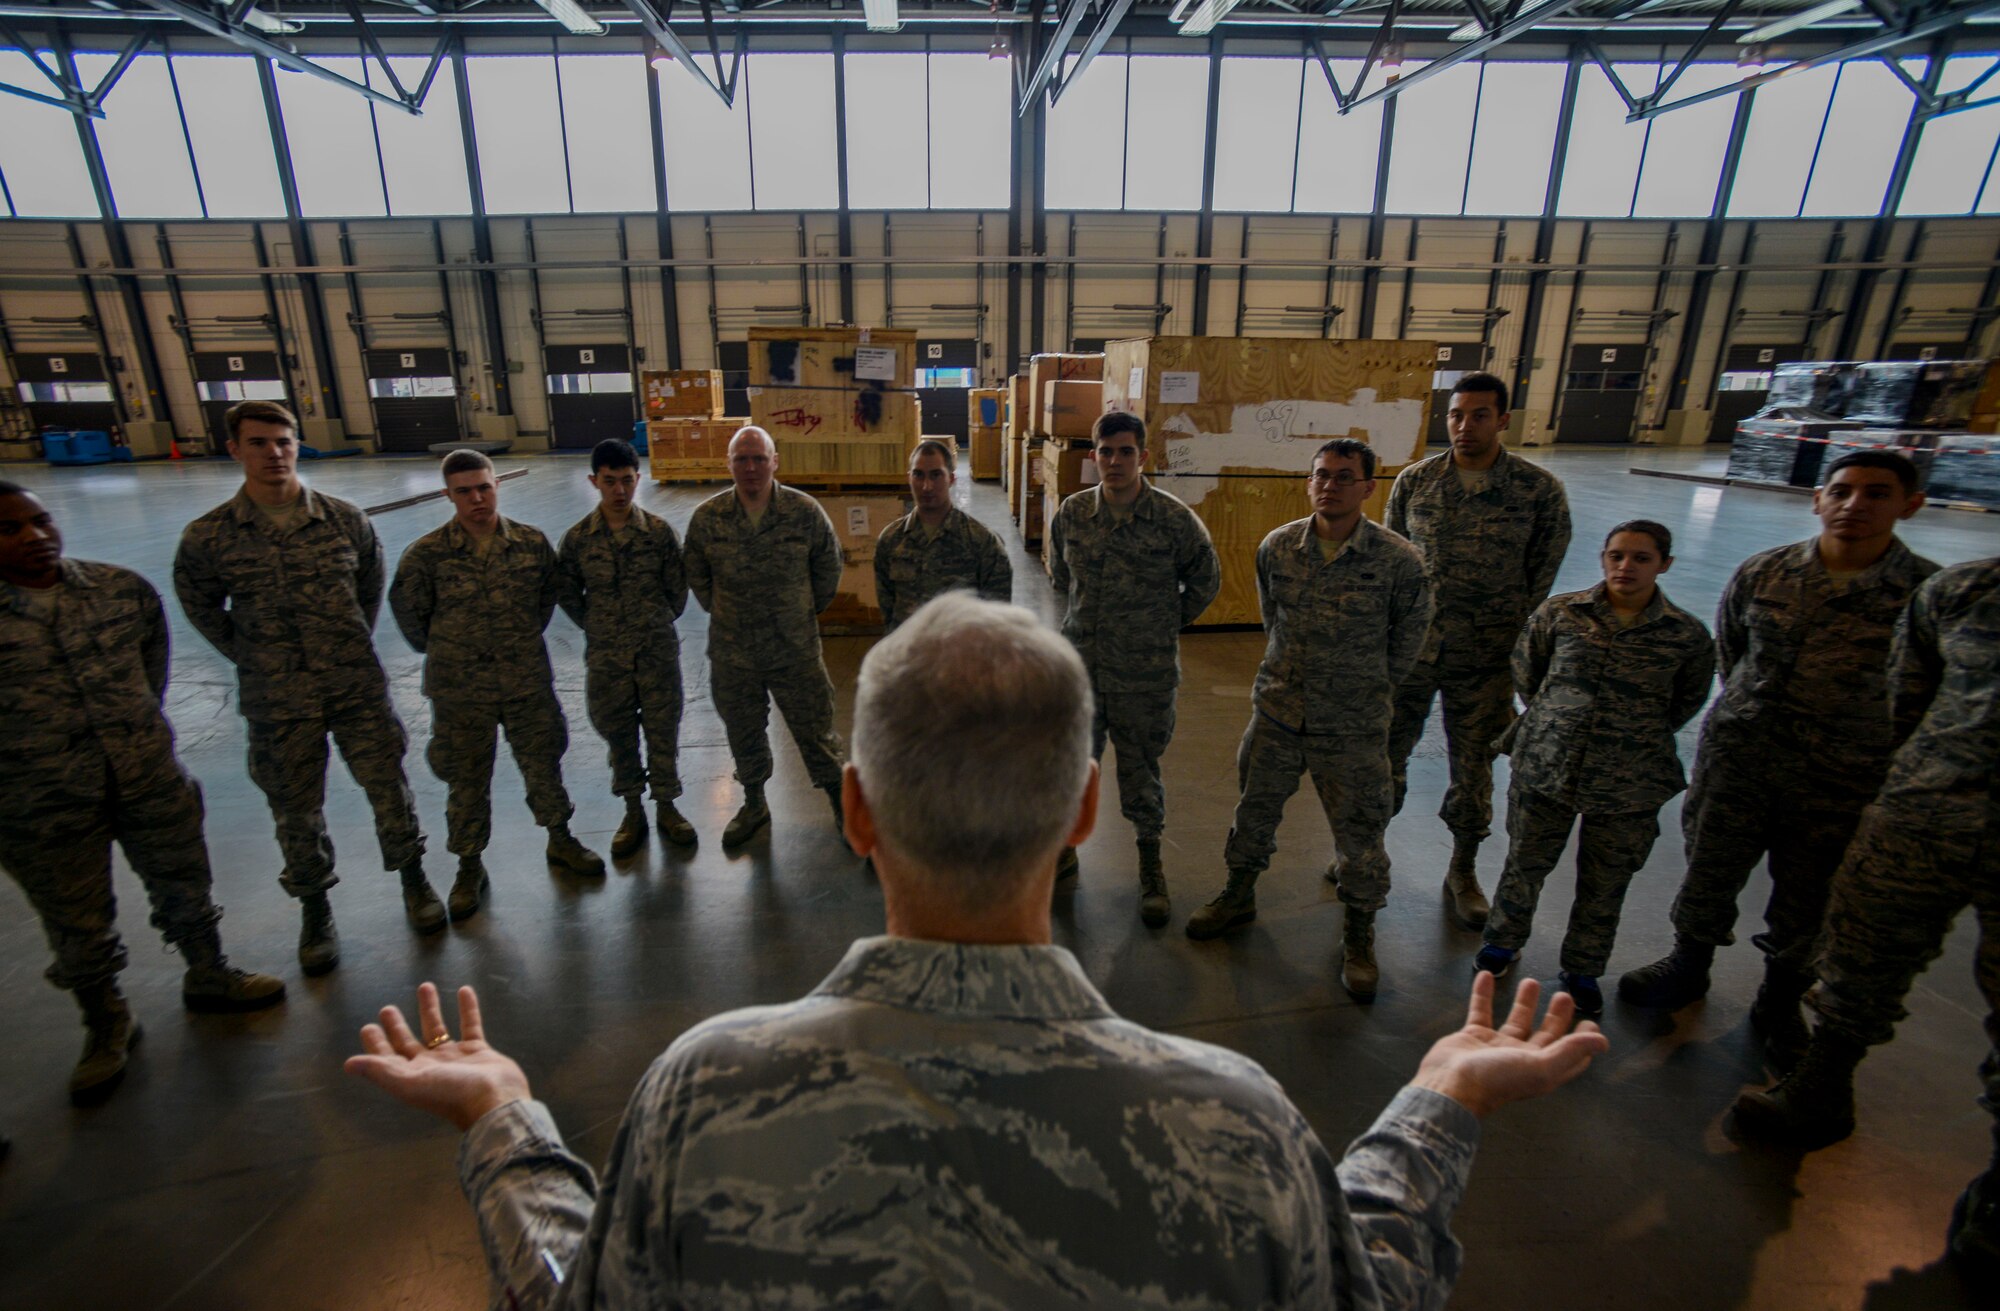 Maj. Gen. Frederick H. Rick Martin, U.S. Air Force Expeditionary Center commander, speaks to Airmen from the 721st Aerial Port Squadron Oct. 13, 2015, at Ramstein Air Base, Germany. During his visit to Ramstein, Martin met with Airmen from the 521st Air Mobility Operations Wing. (U.S. Air Force photo/Senior Airman Nicole Sikorski) 